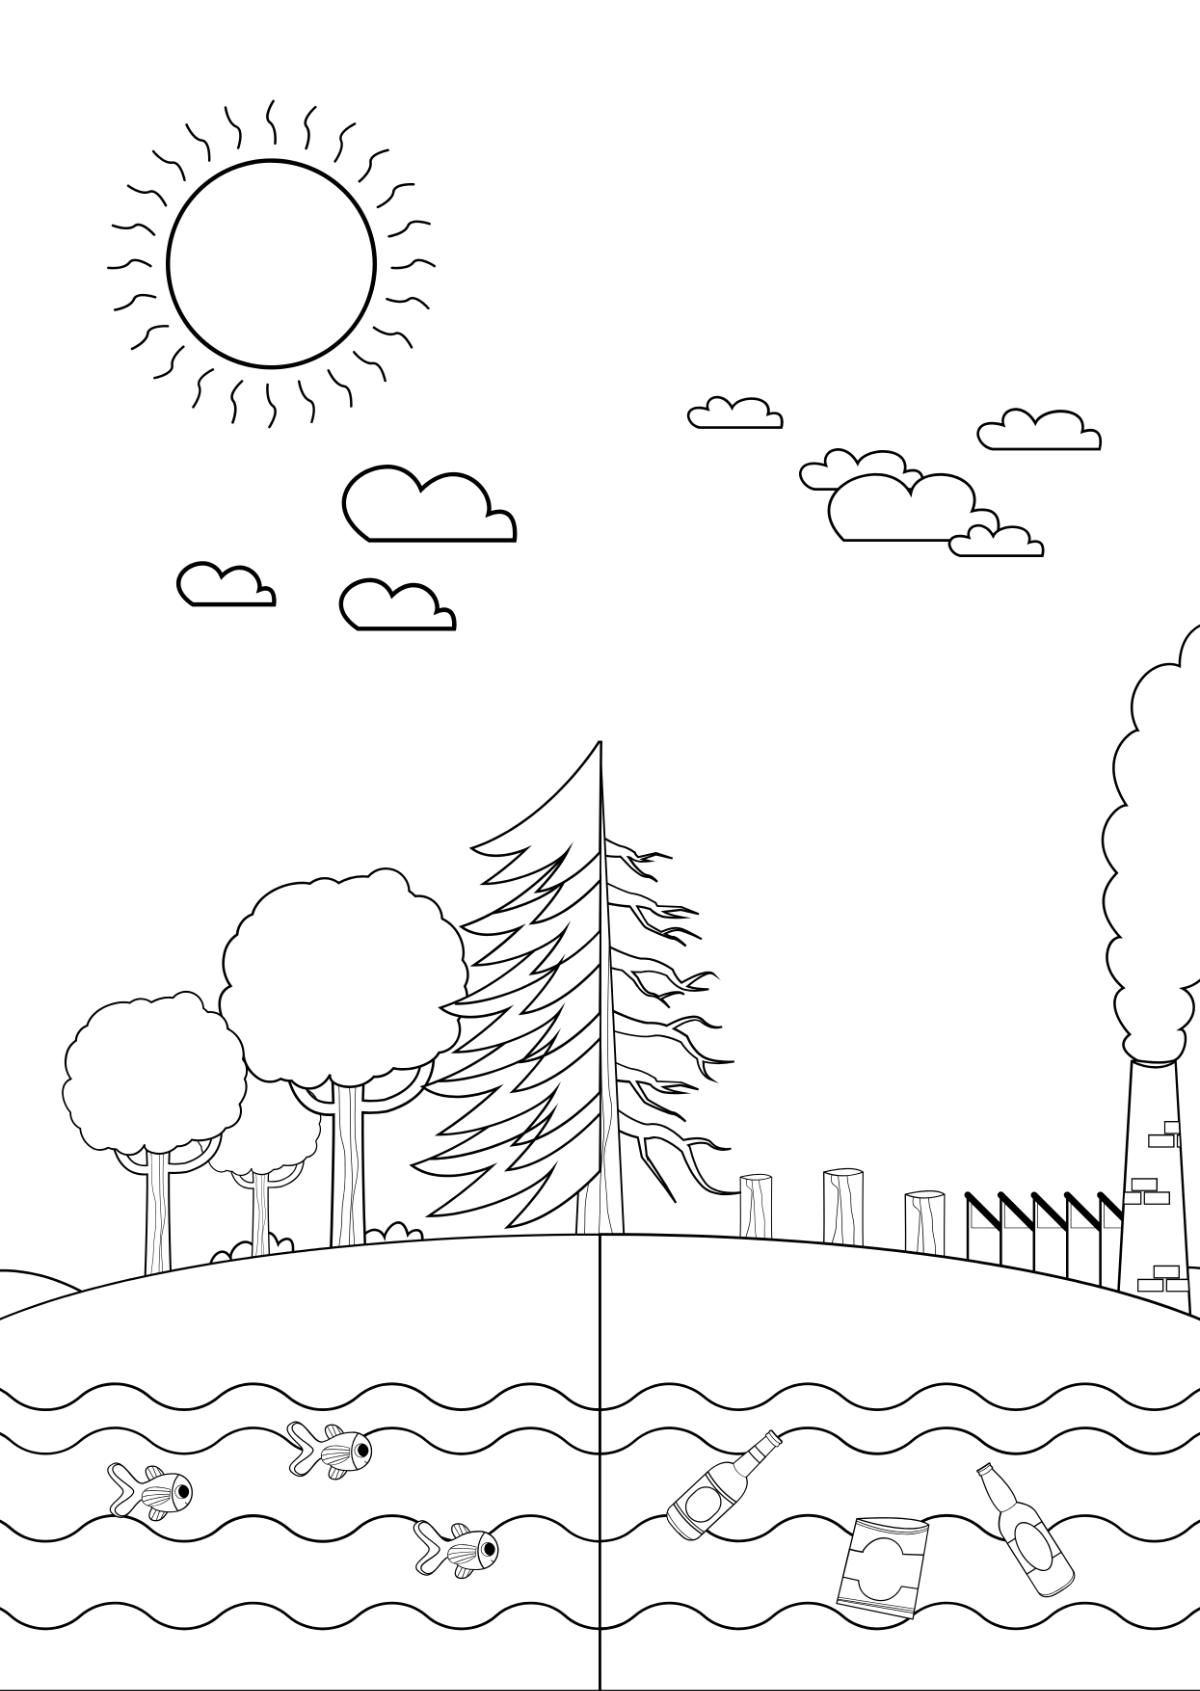 Free Environment Drawing For Competition Template